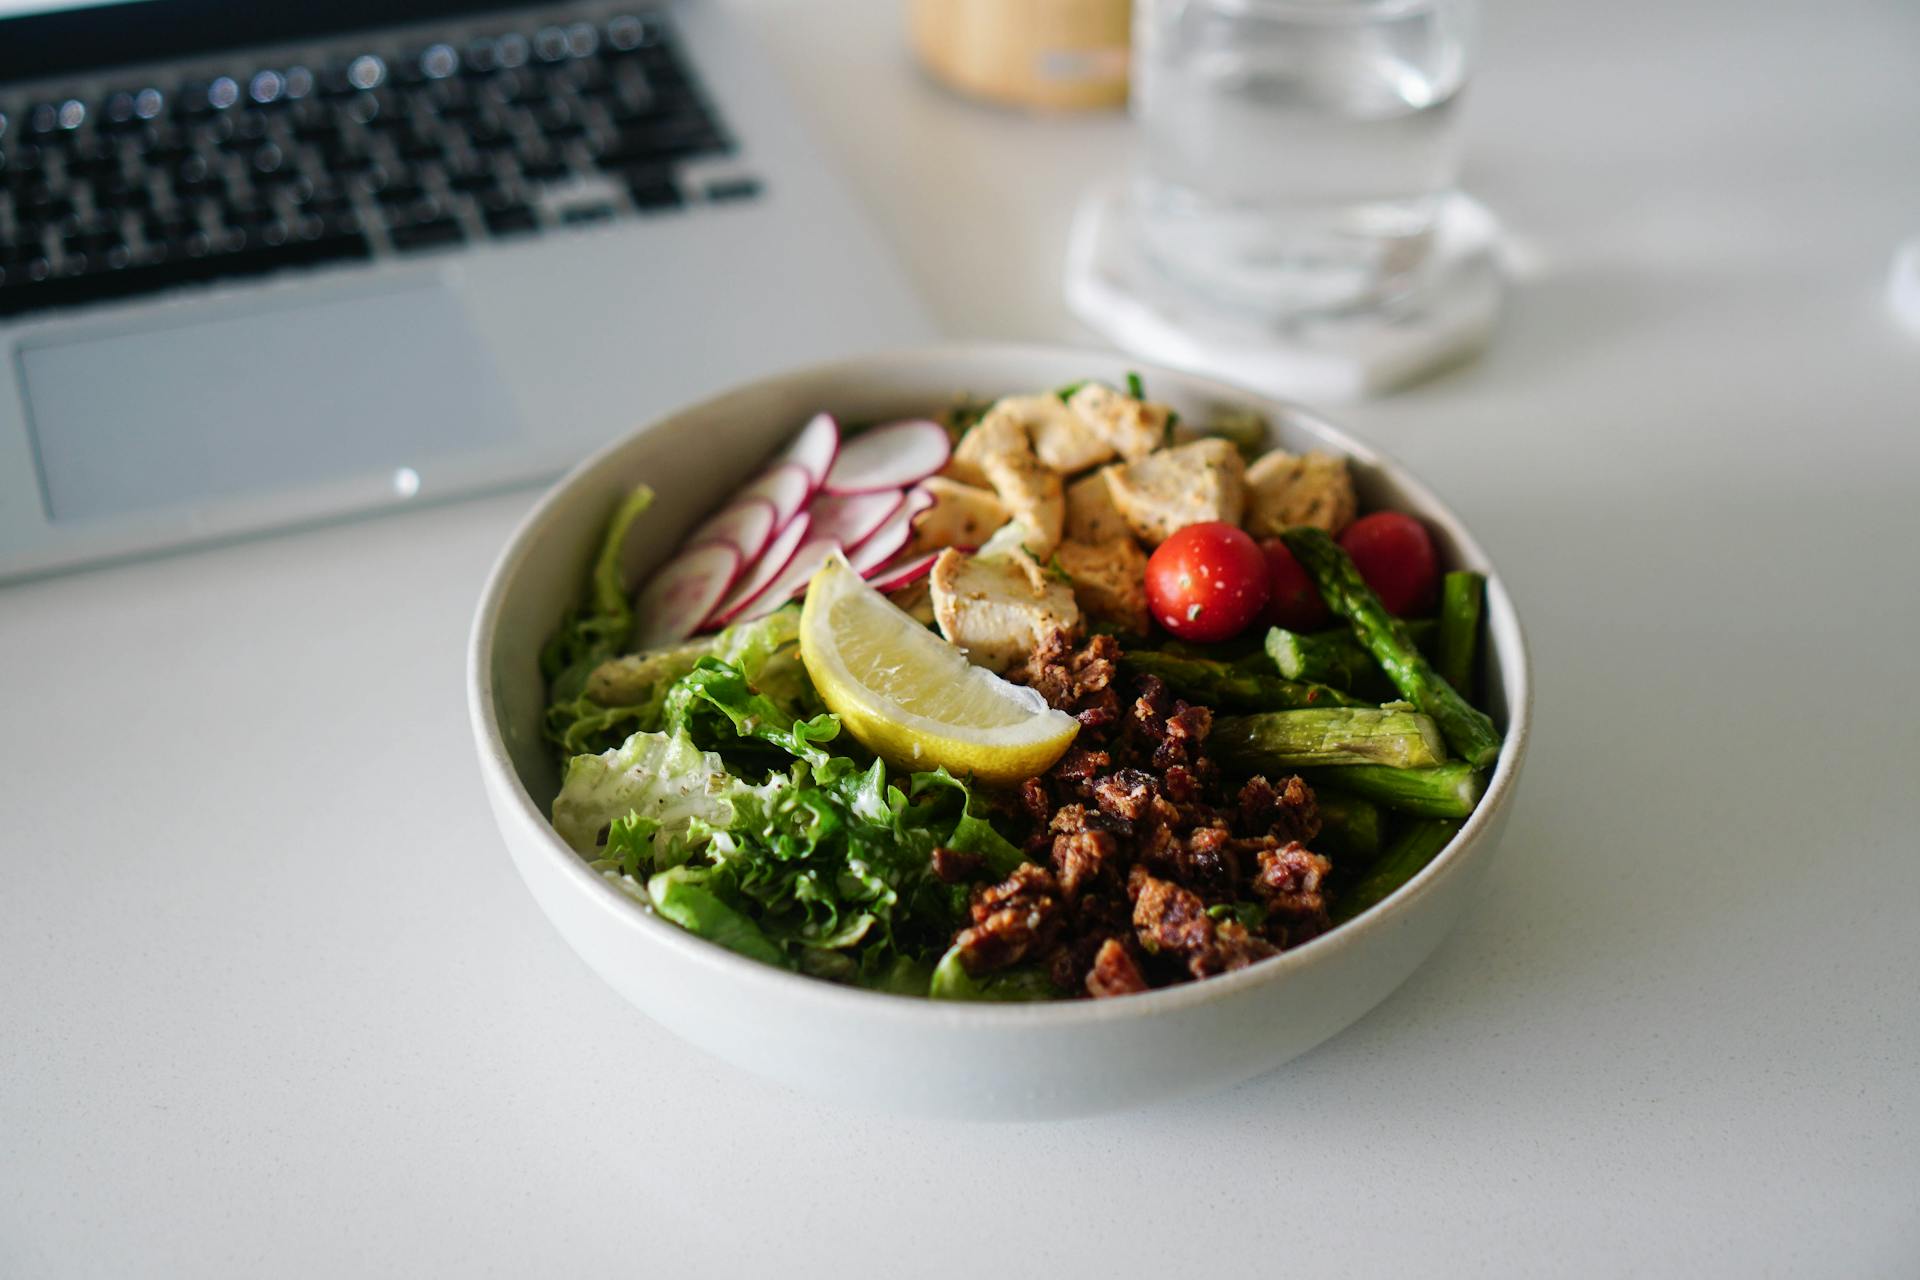 A Delicious Bowl of Salad with Walnuts and a Slice of Lemon